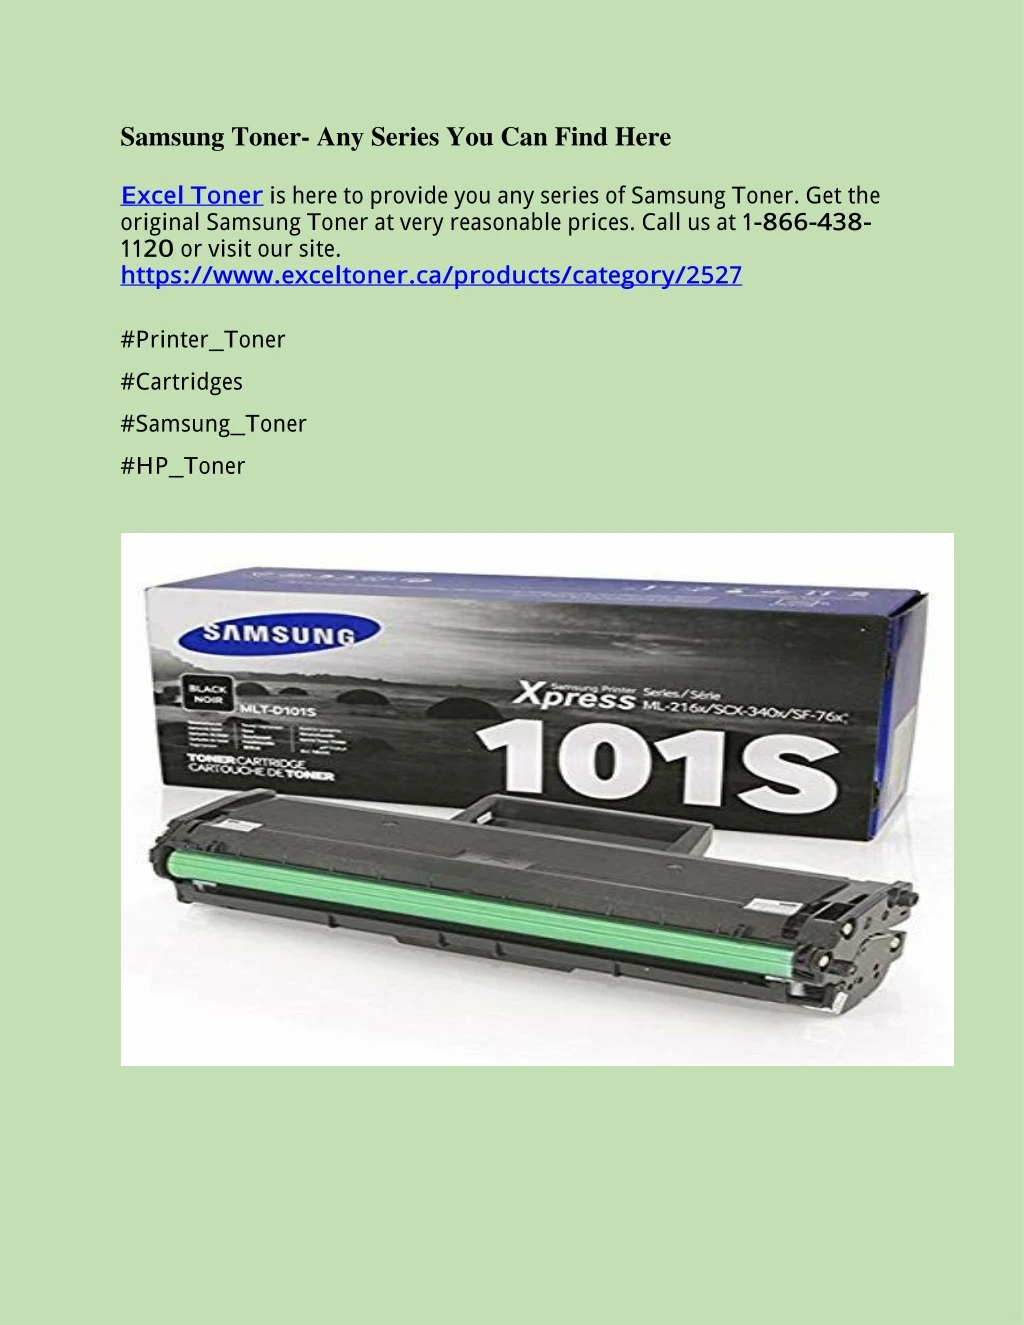 samsung toner any series you can find here